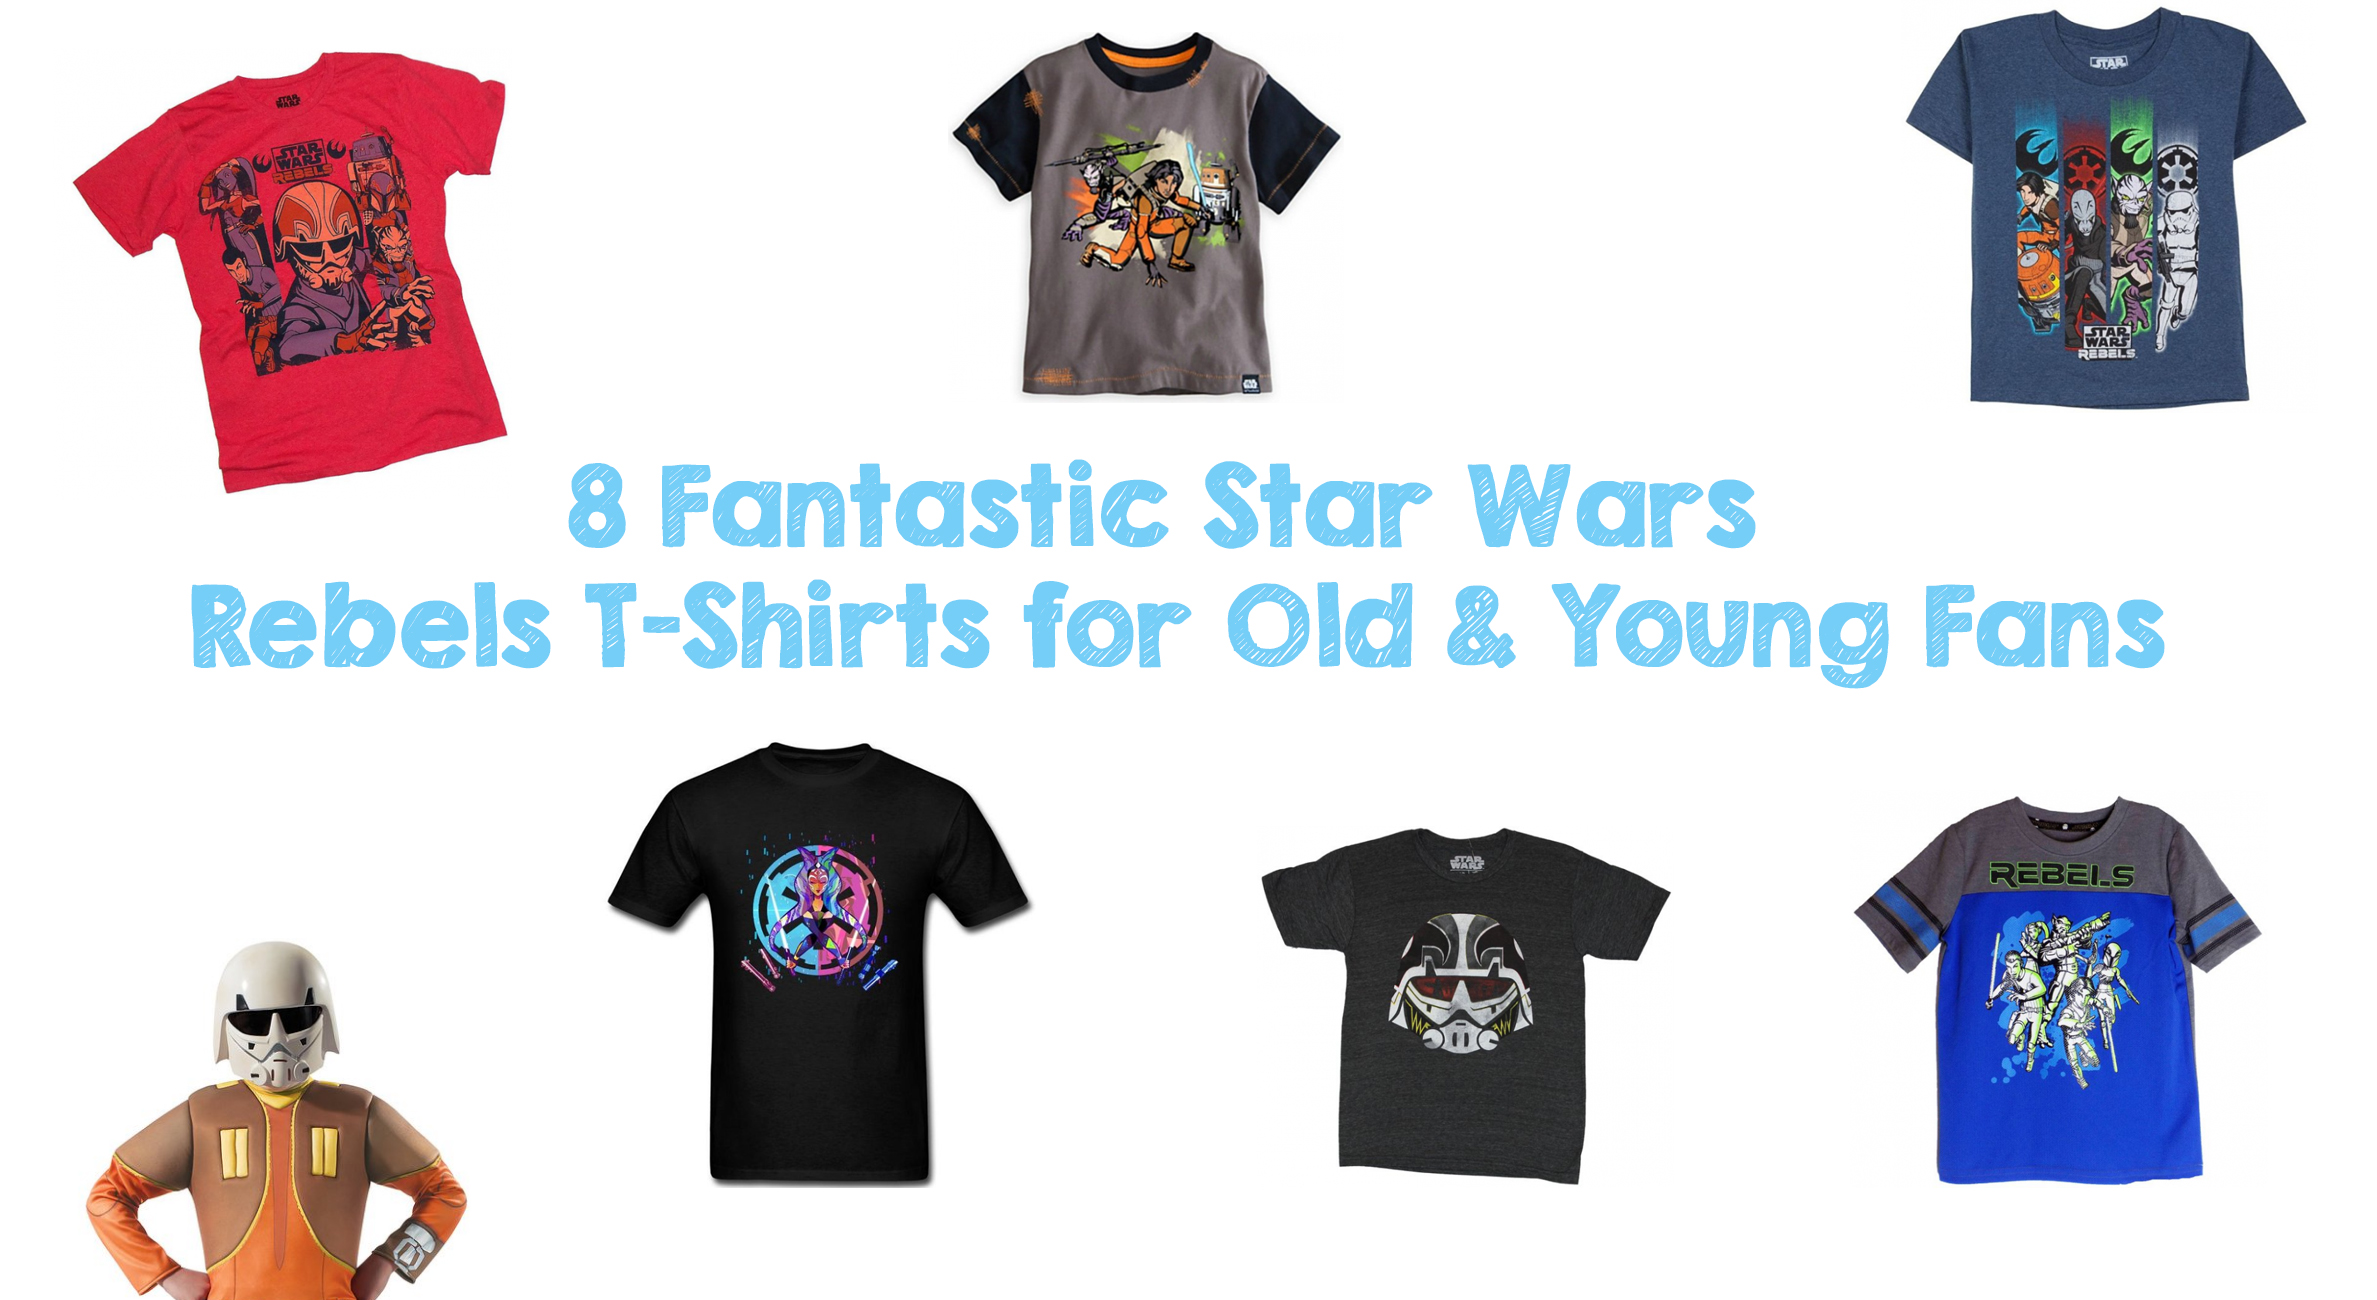 8 Fantastic Star Wars Rebels T-Shirts for Old & Young Fans